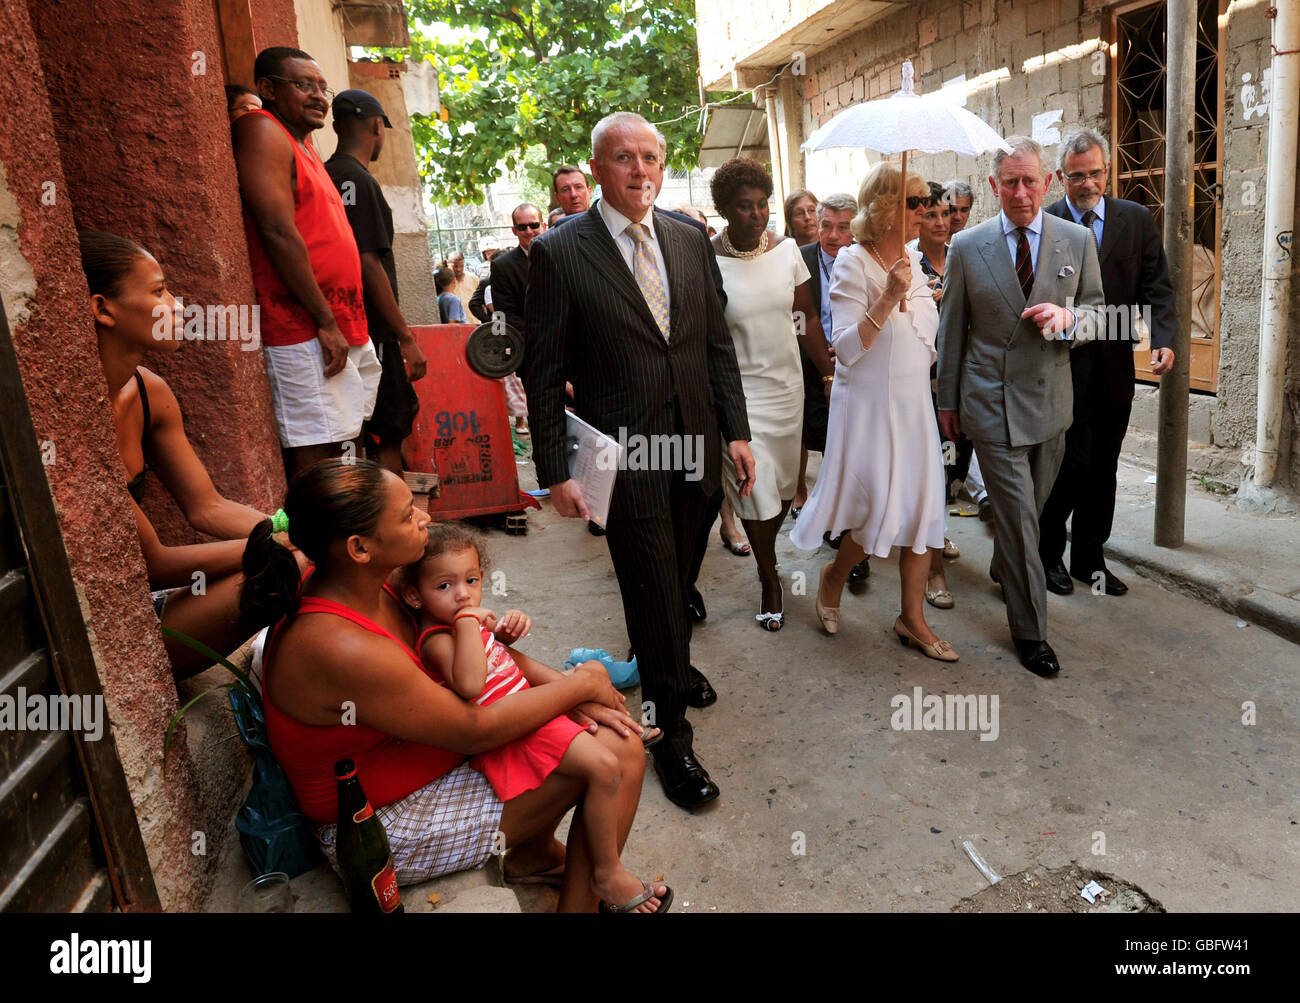 The Prince of Wales and the Duchess of Cornwall tour a favela (shanty town) on the outskirts of Rio de Janeiro,in Brazil. Stock Photo